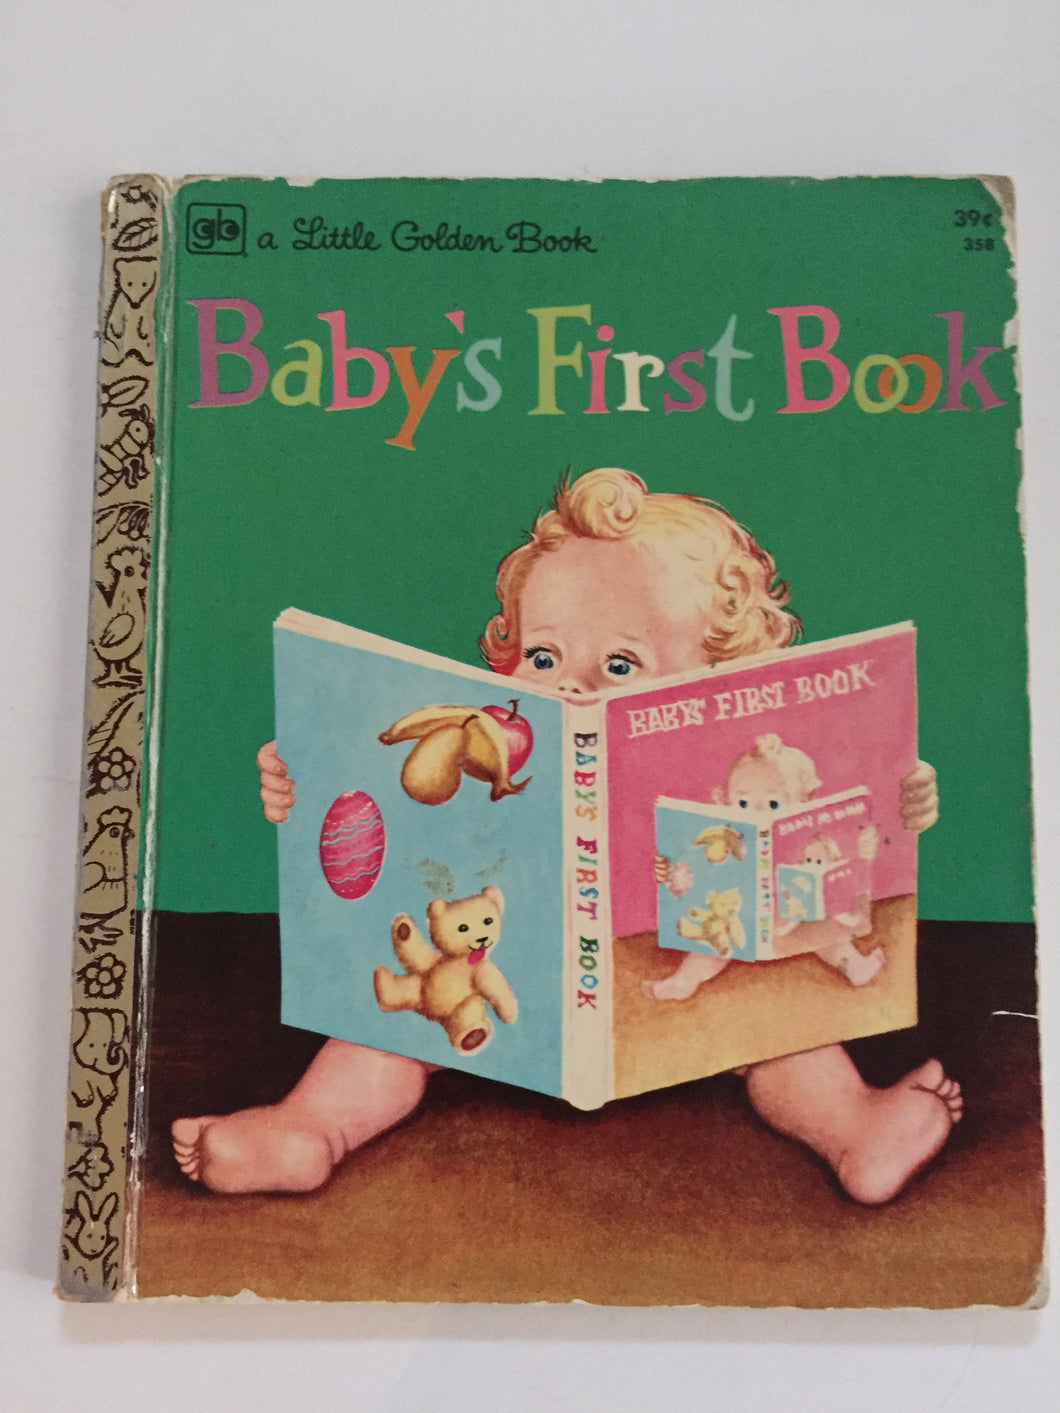 Baby's First Book - Slick Cat Book